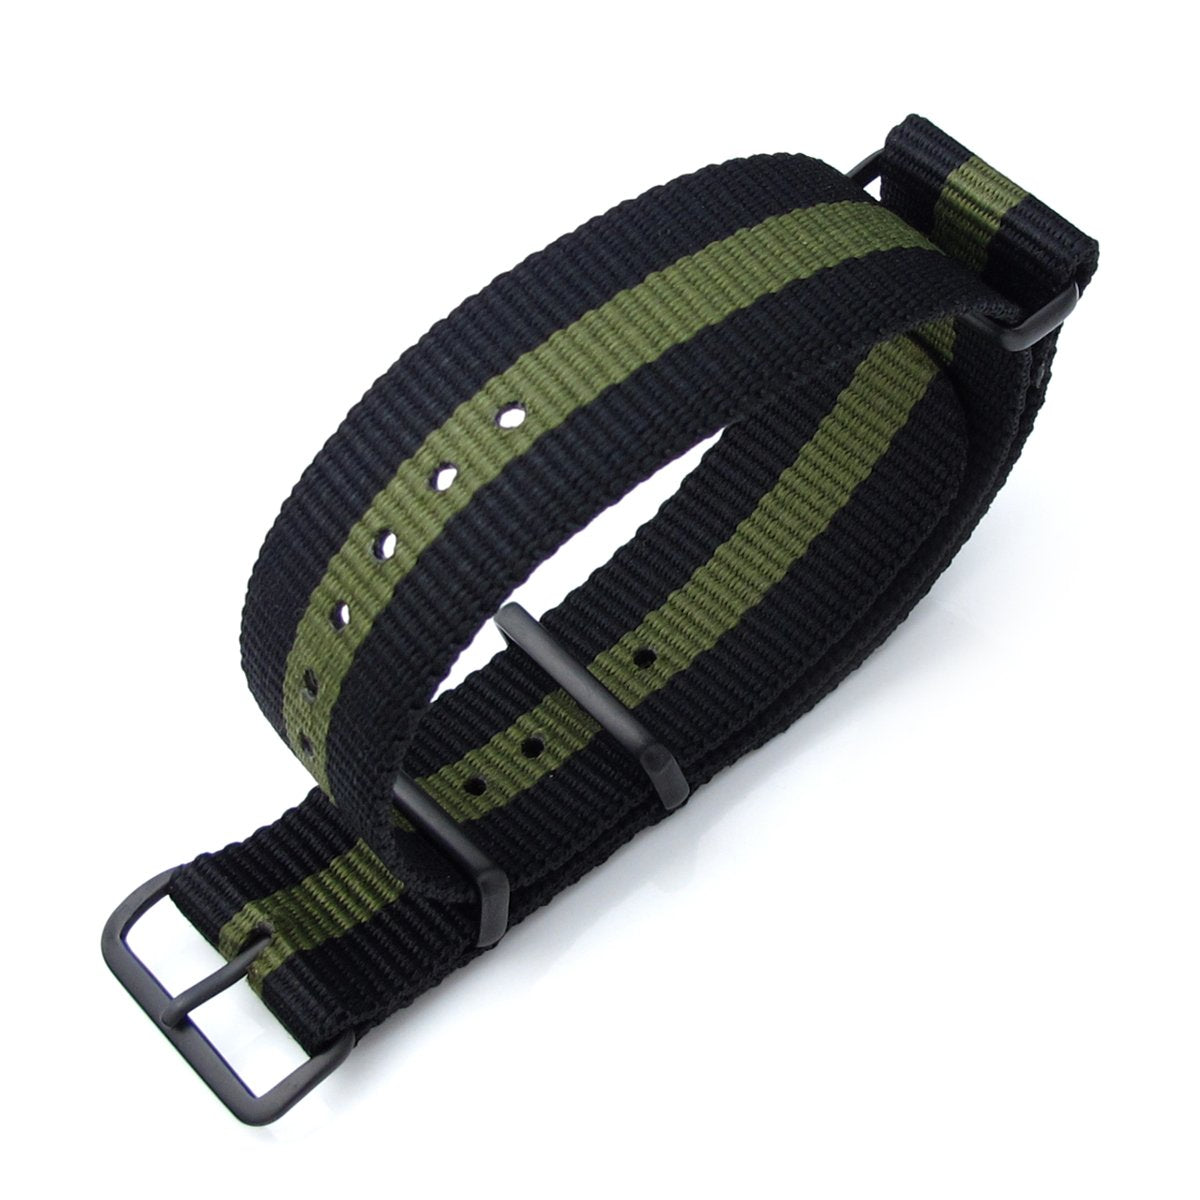 MiLTAT 21mm or 22mm G10 NATO Military Watch Strap Ballistic Nylon Armband PVD Black Black & Military Green Strapcode Watch Bands